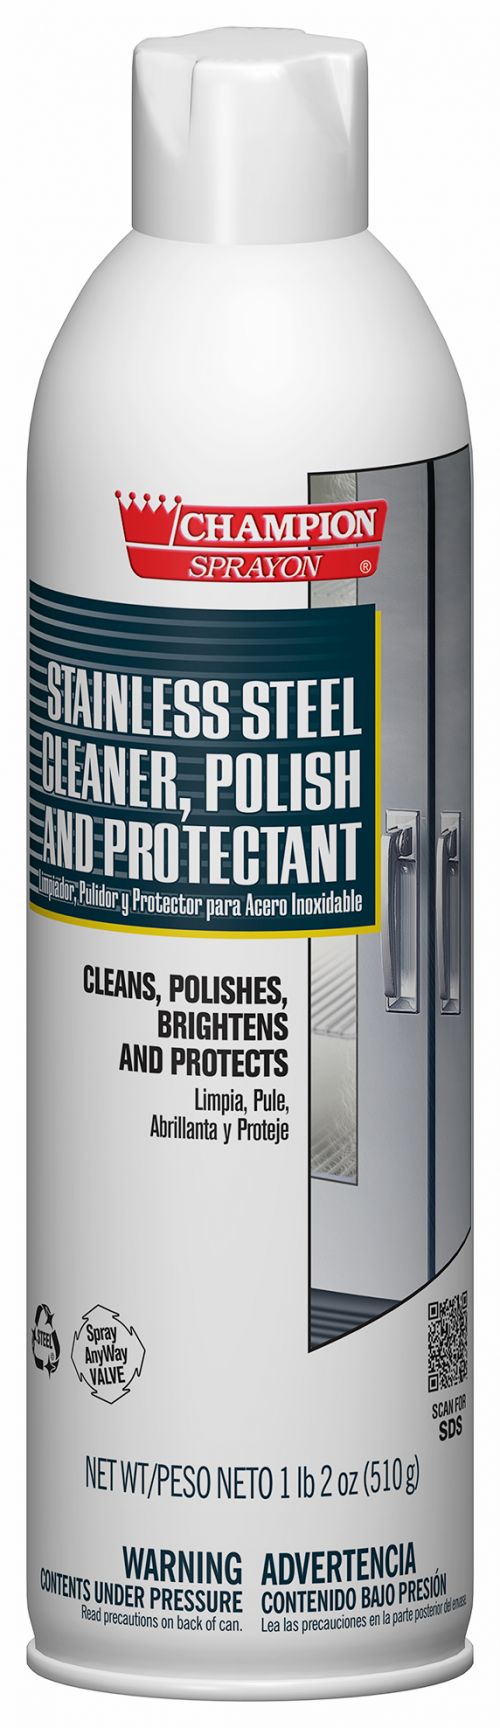 Stainless Steel Cleaner Polish and